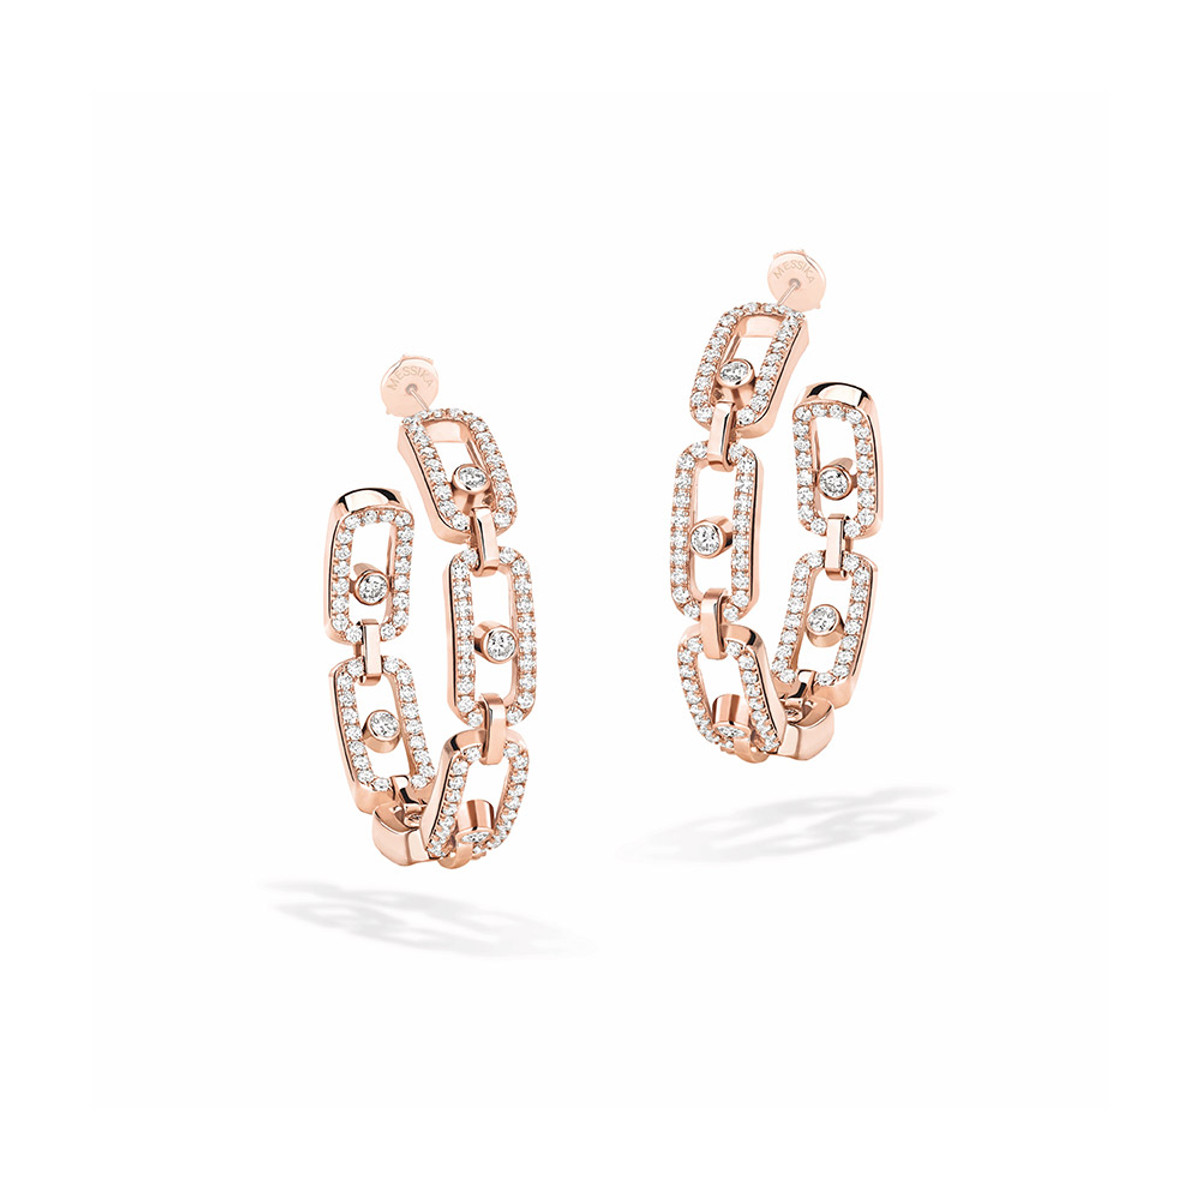 Messika 18K Rose Gold Move Link Diamond Hoop Earrings-56317 Product Image